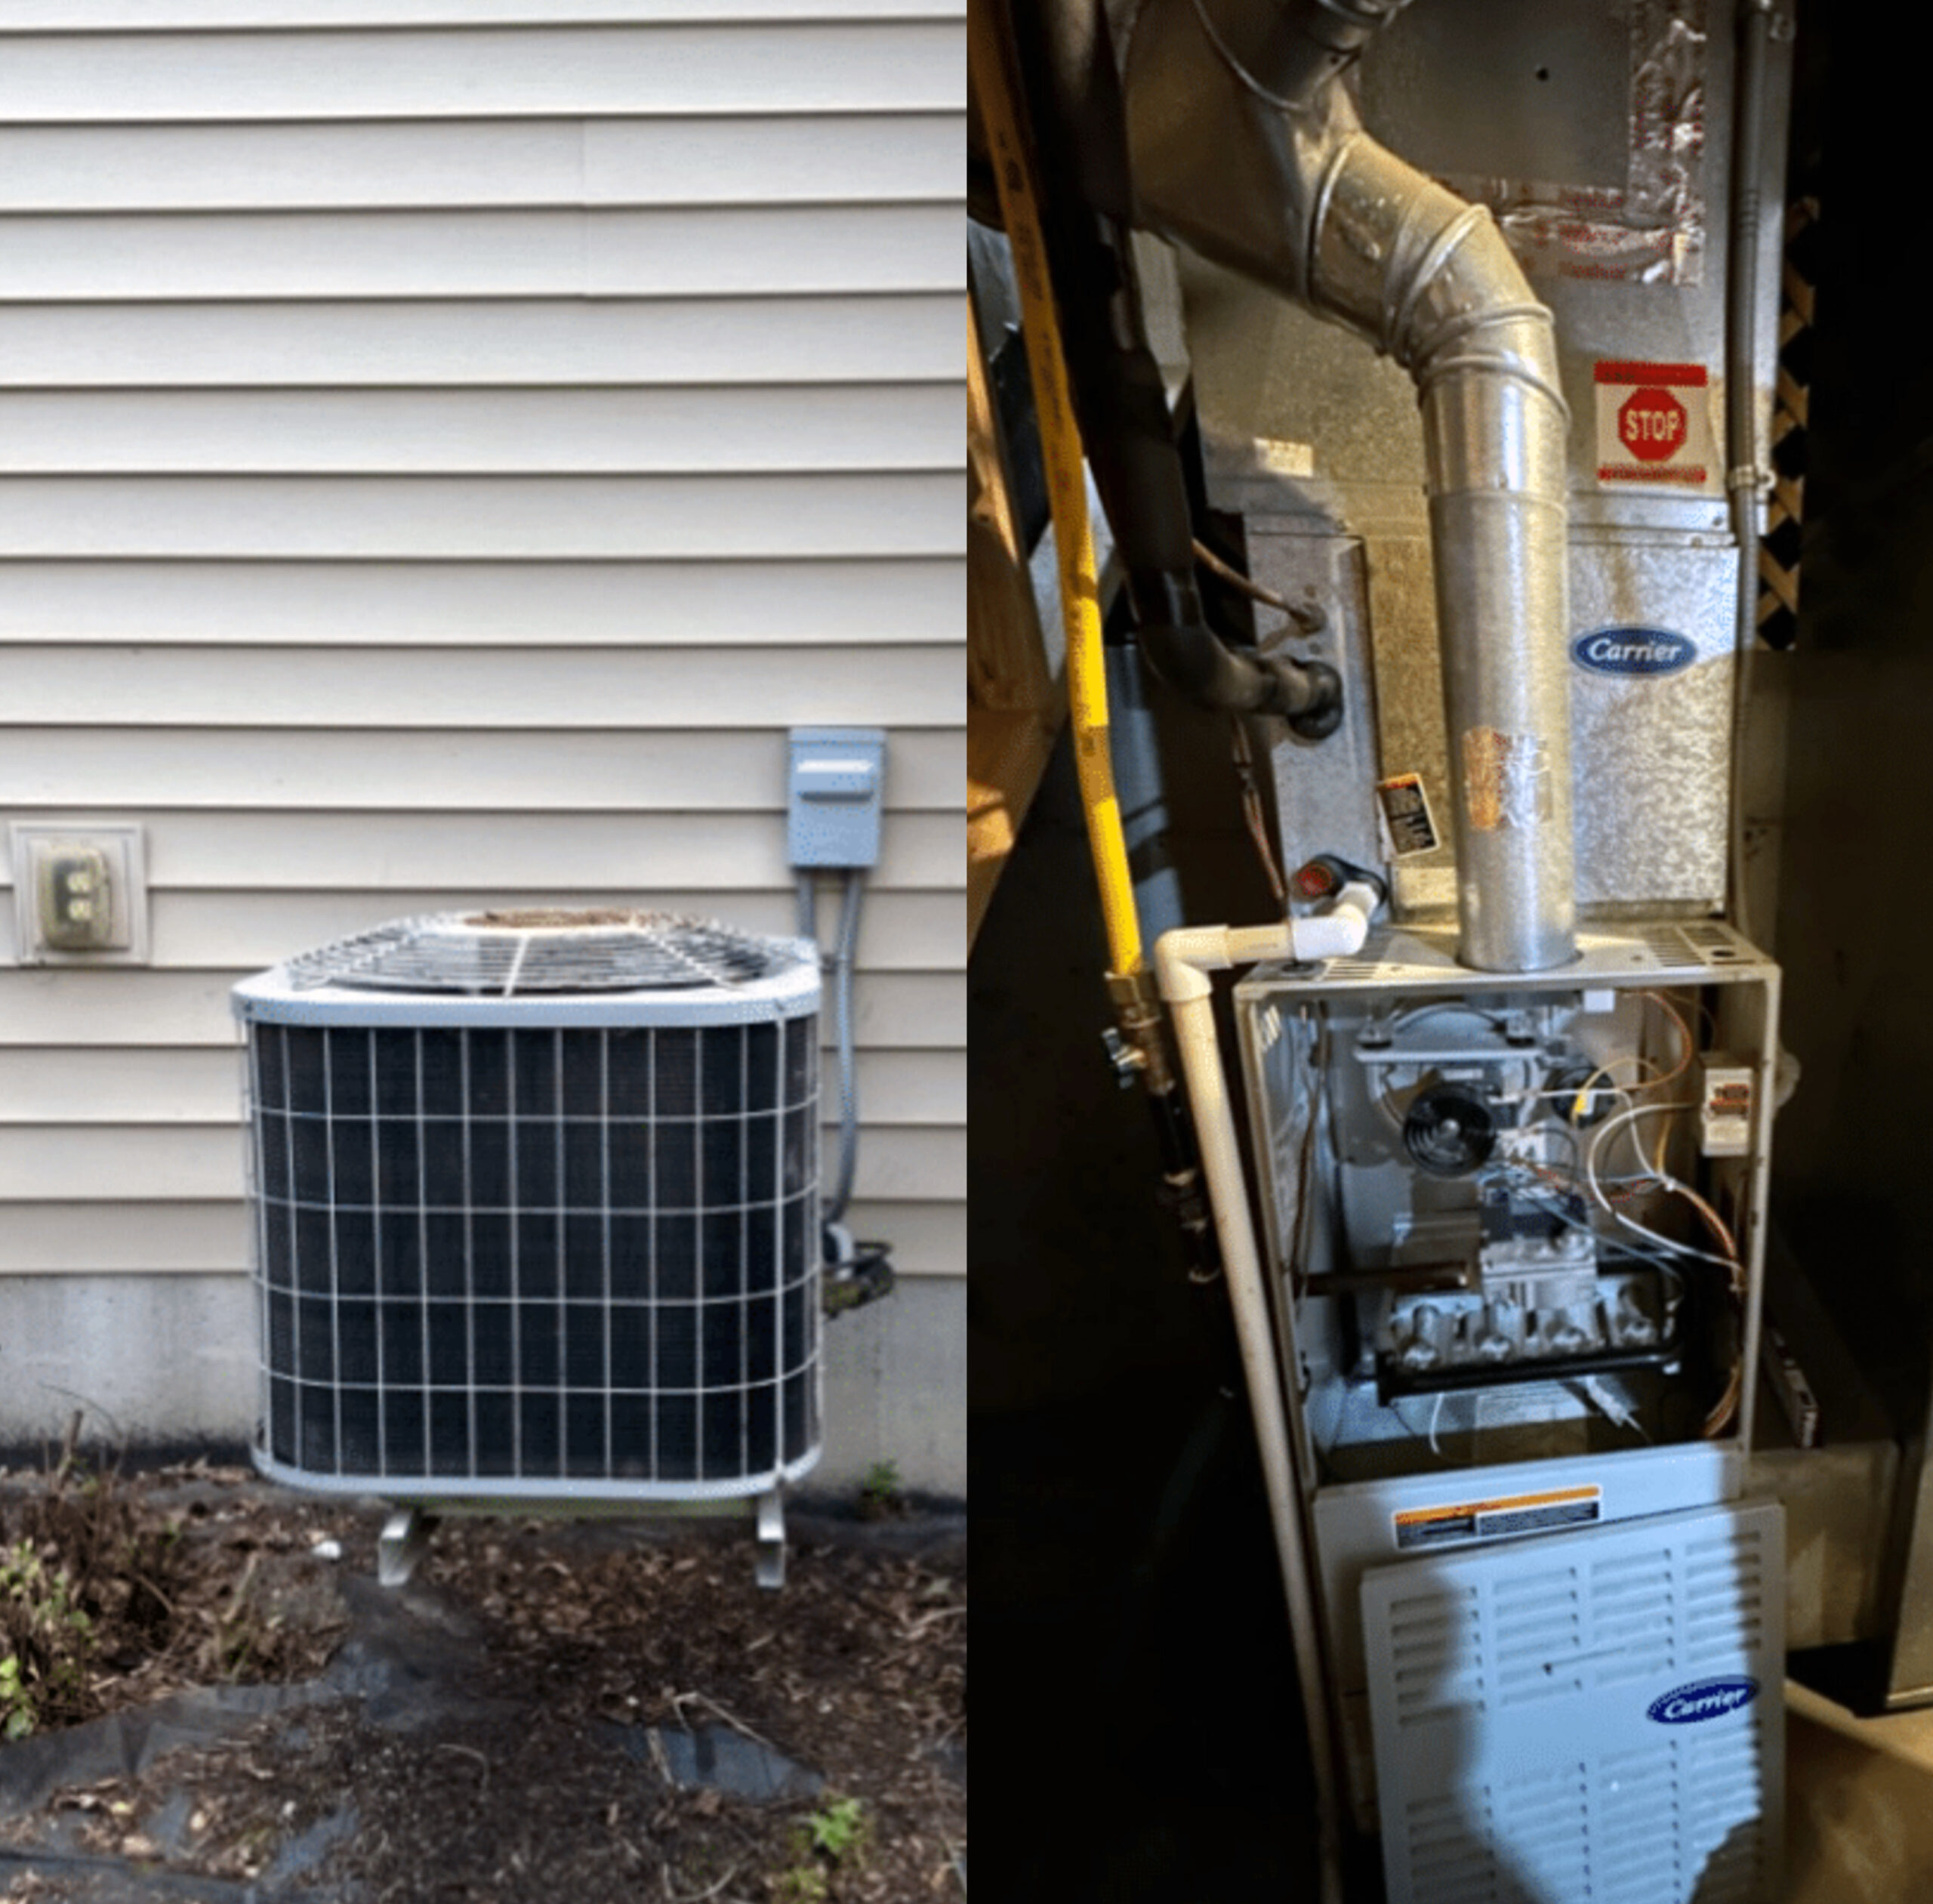 Old Carrier AC and 80% Natural Gas Furnace